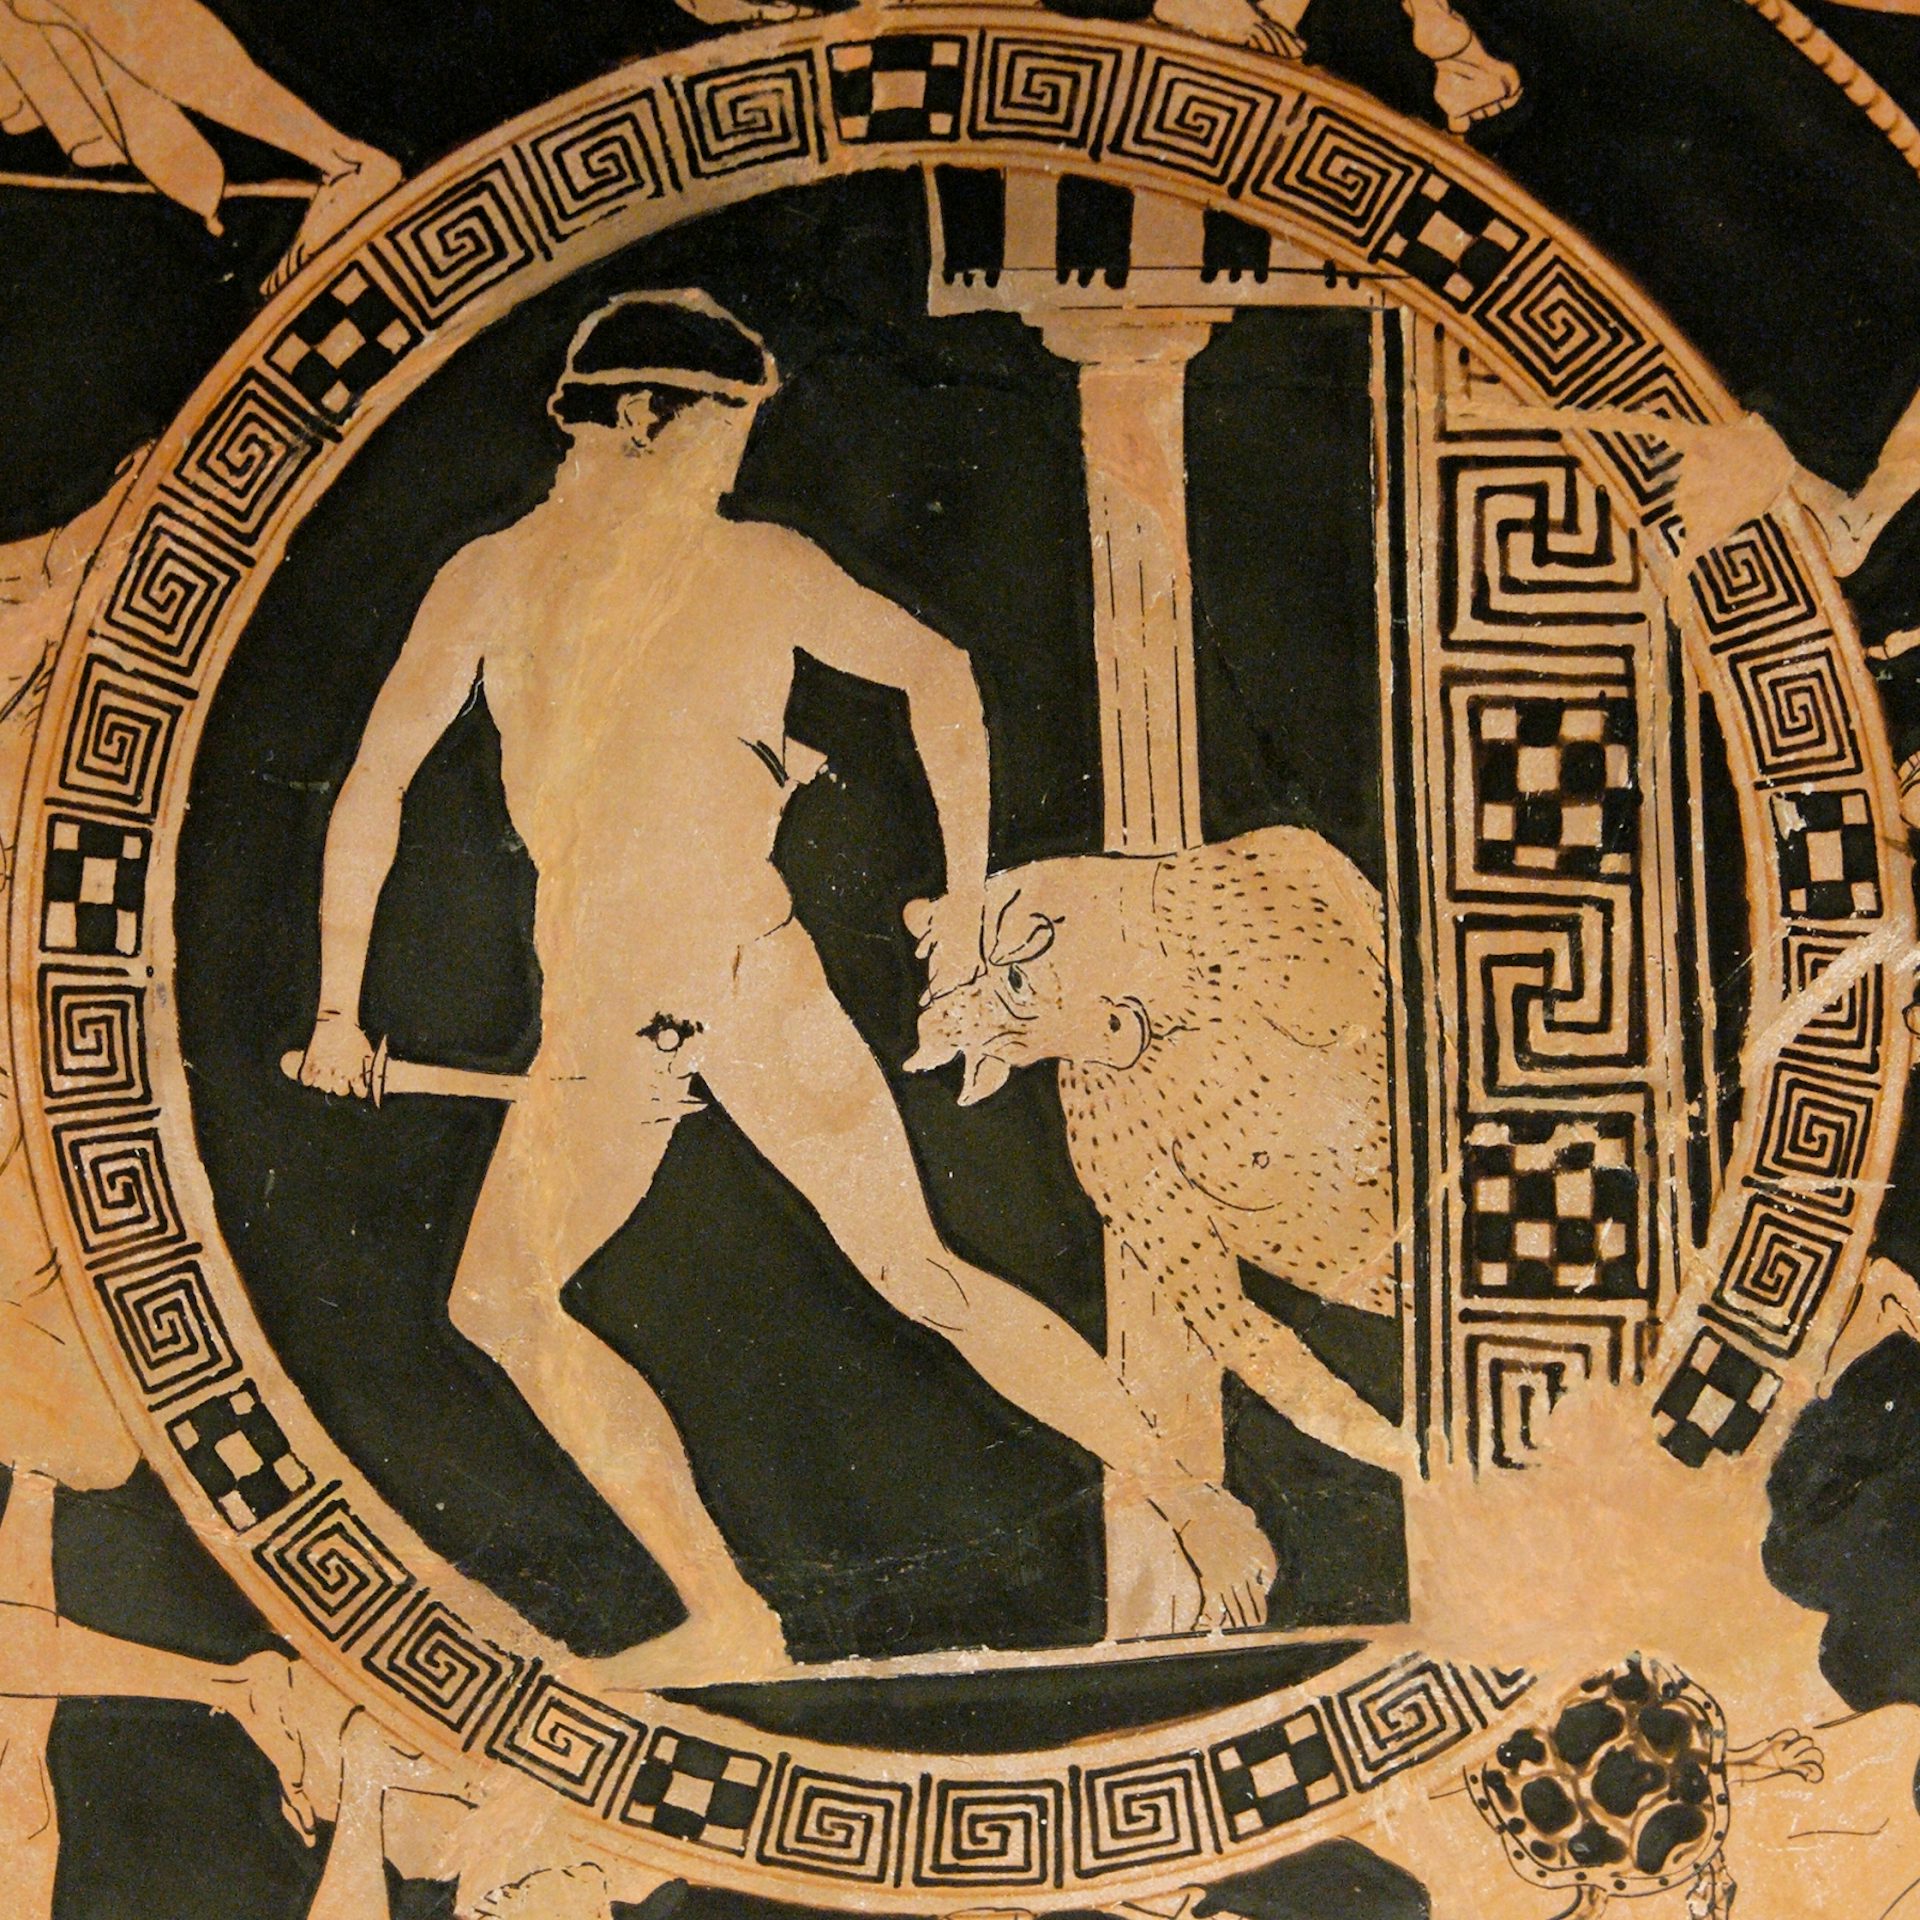 Vase painting of Theseus and the Minotaur